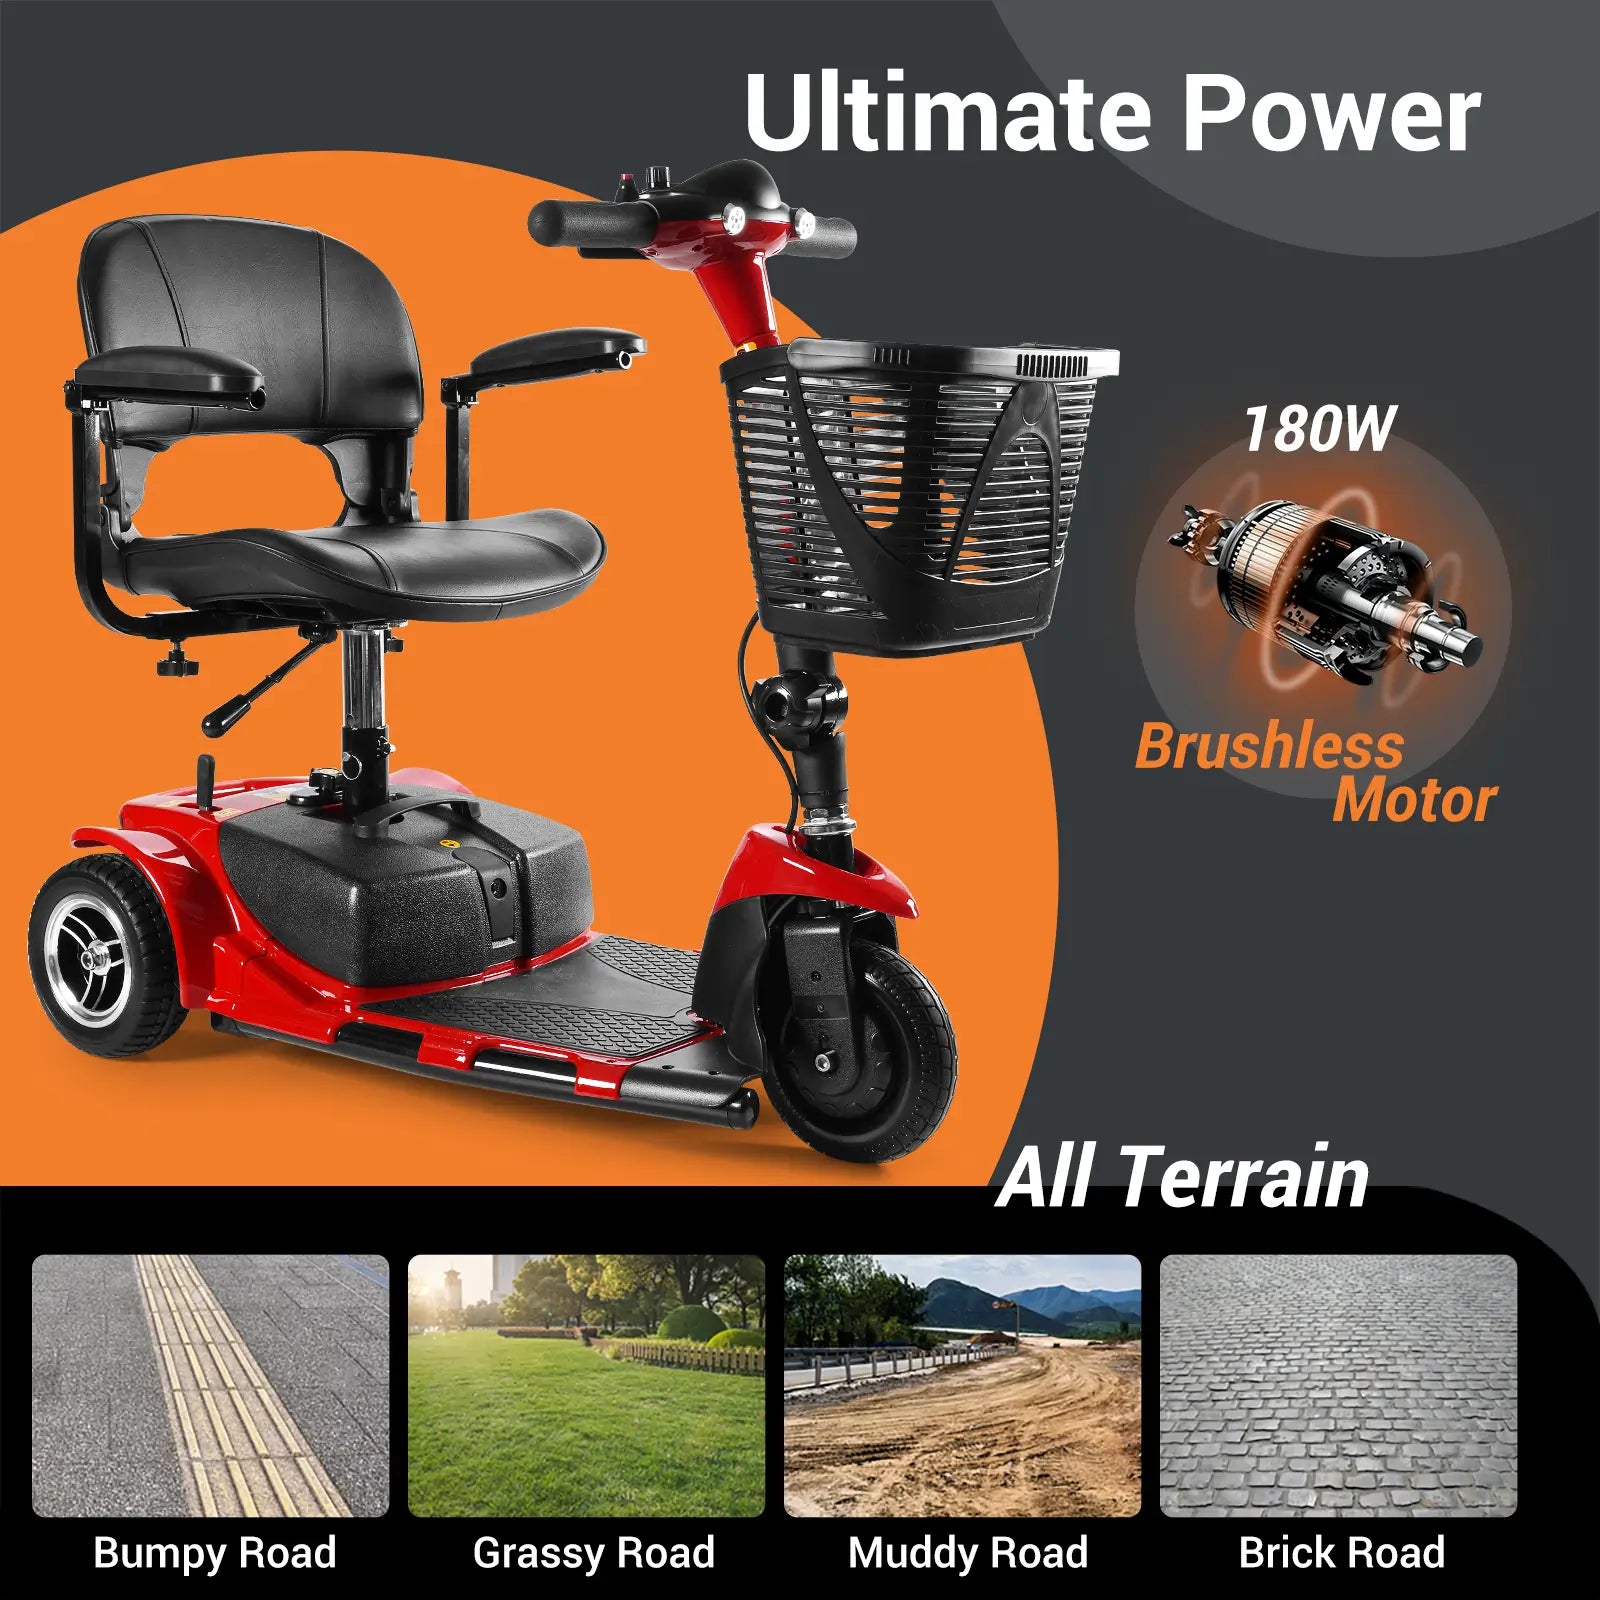 Soulout 3 Wheel Electric Mobility Scooter-Red-all terrain